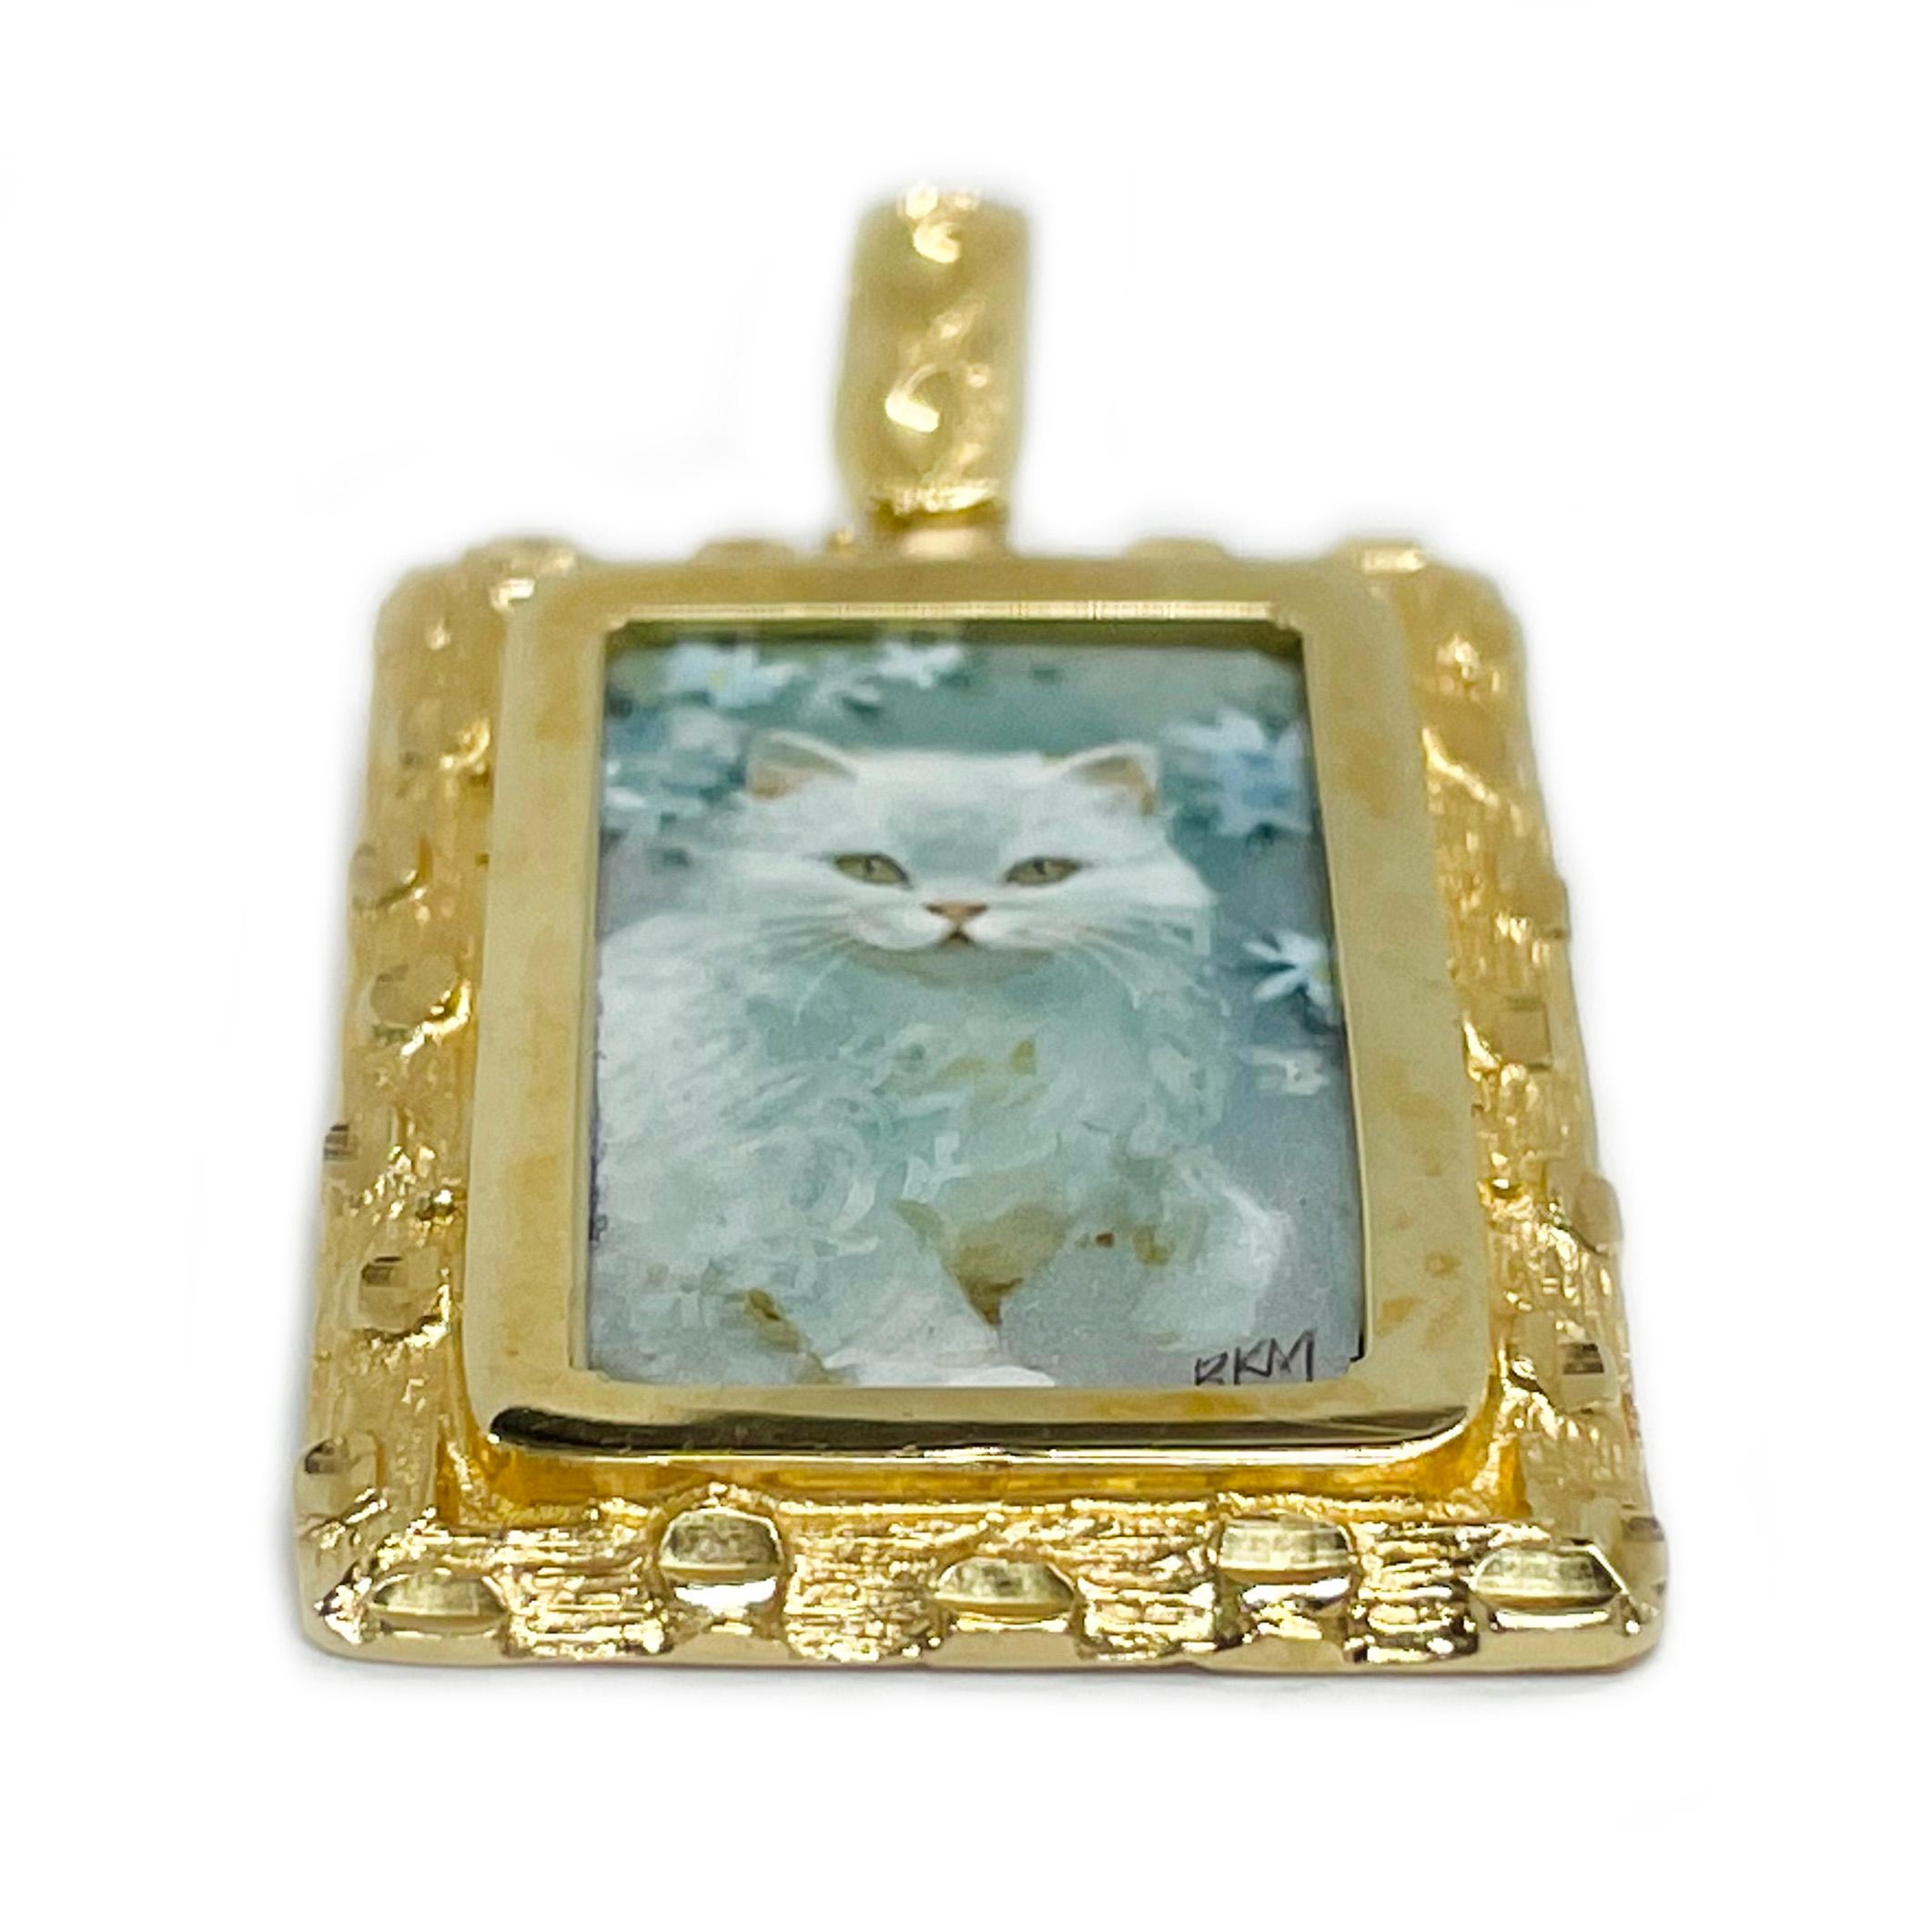 14 Karat Yellow Gold White Cat Hand Painted on Mother of Pearl Pendant. The miniature painting is set in a 14 karat gold rectangular frame with diamond-cut details. The painting is signed by the master artist,  BKM Brian M. and includes a